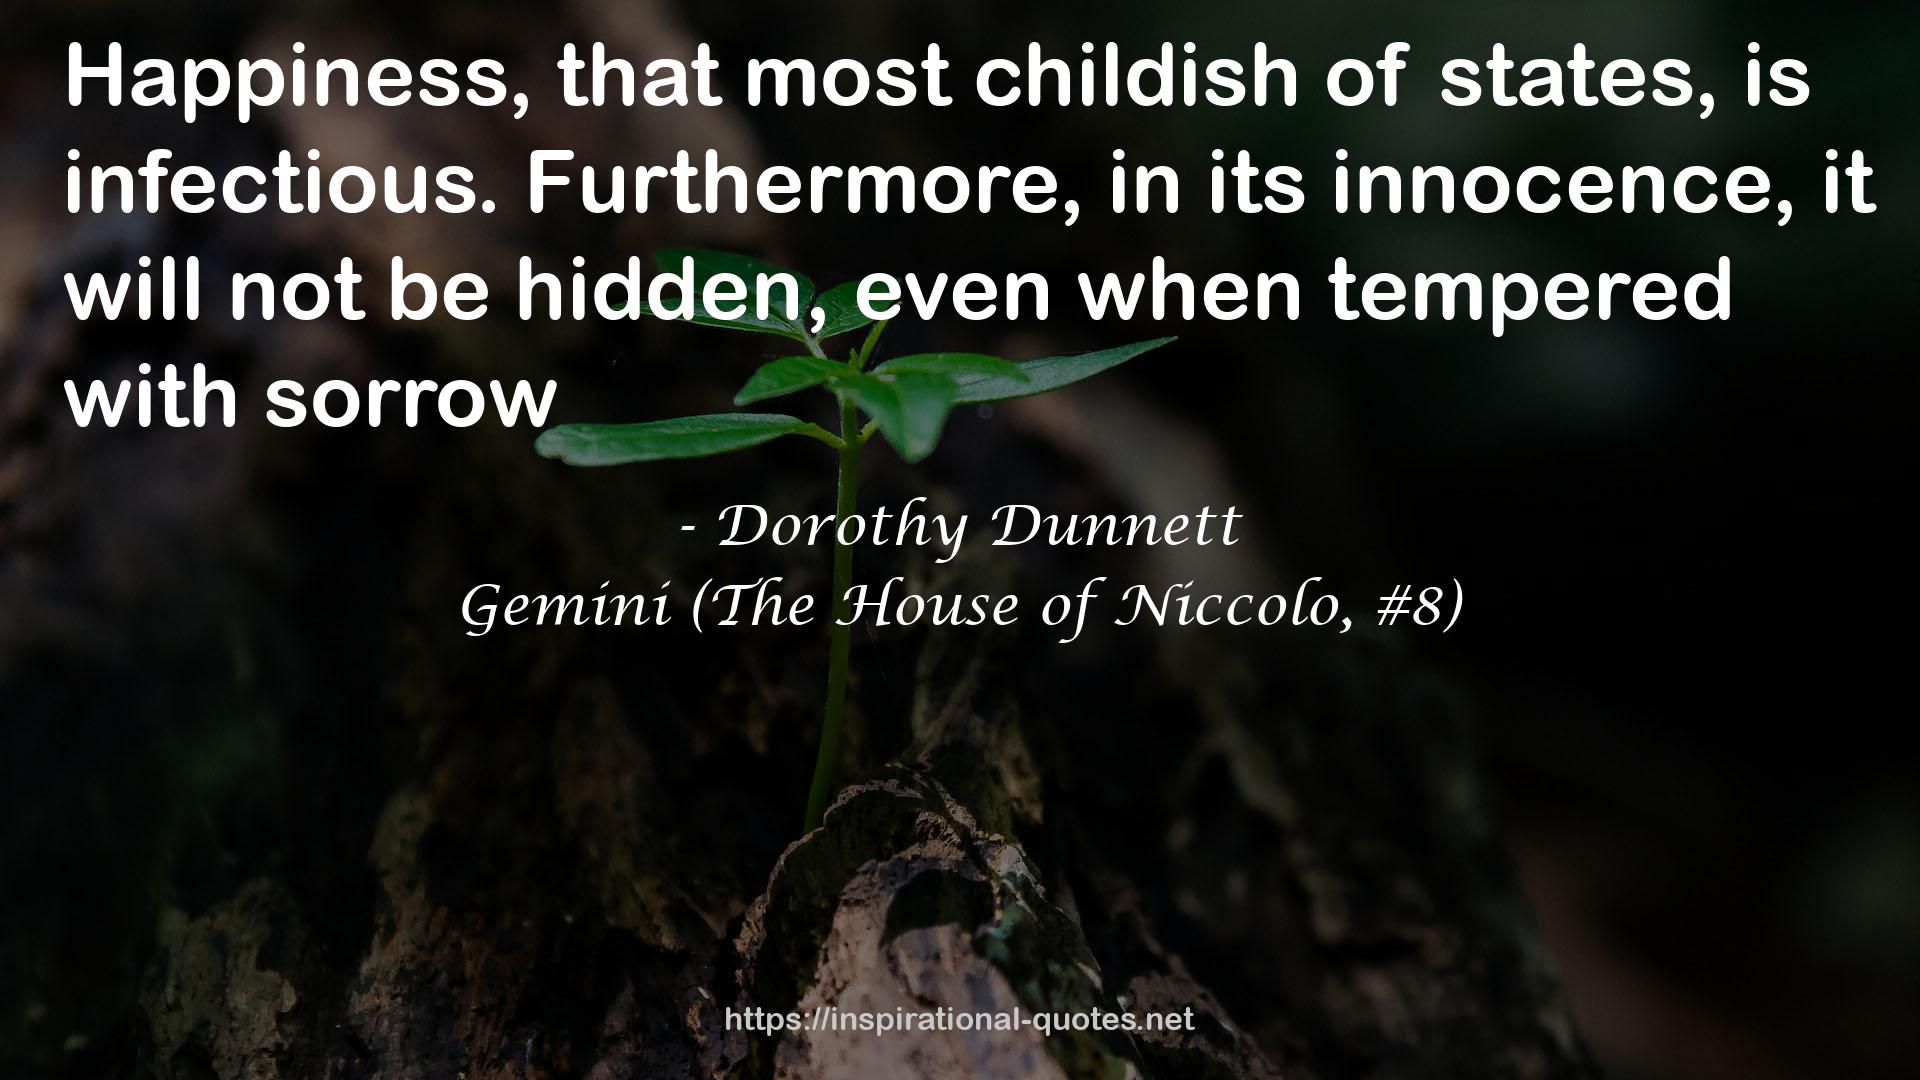 Gemini (The House of Niccolo, #8) QUOTES